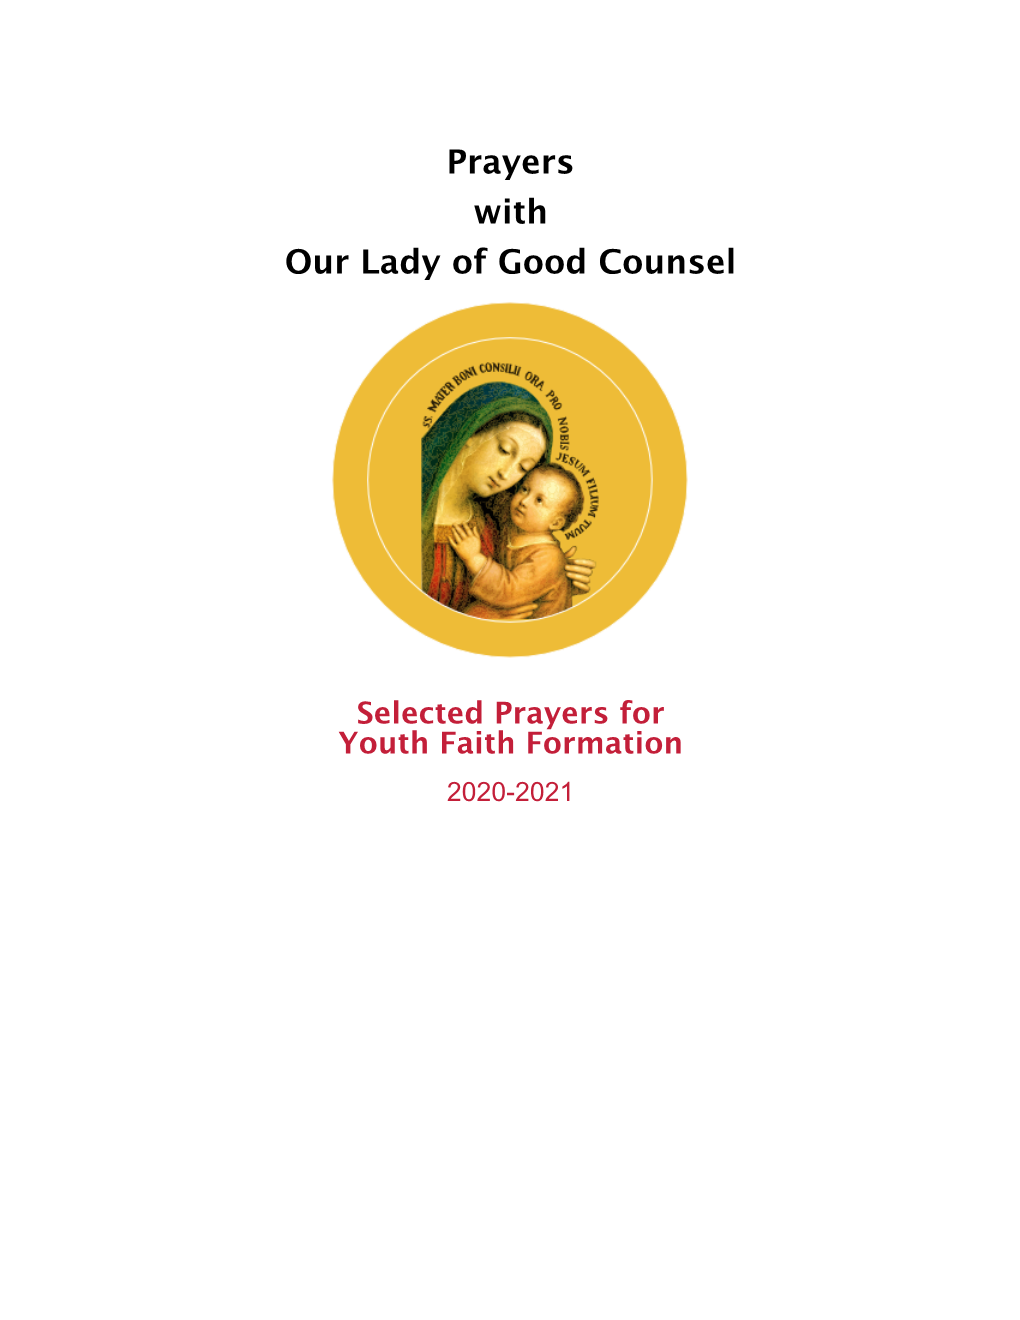 Prayers with Our Lady of Good Counsel